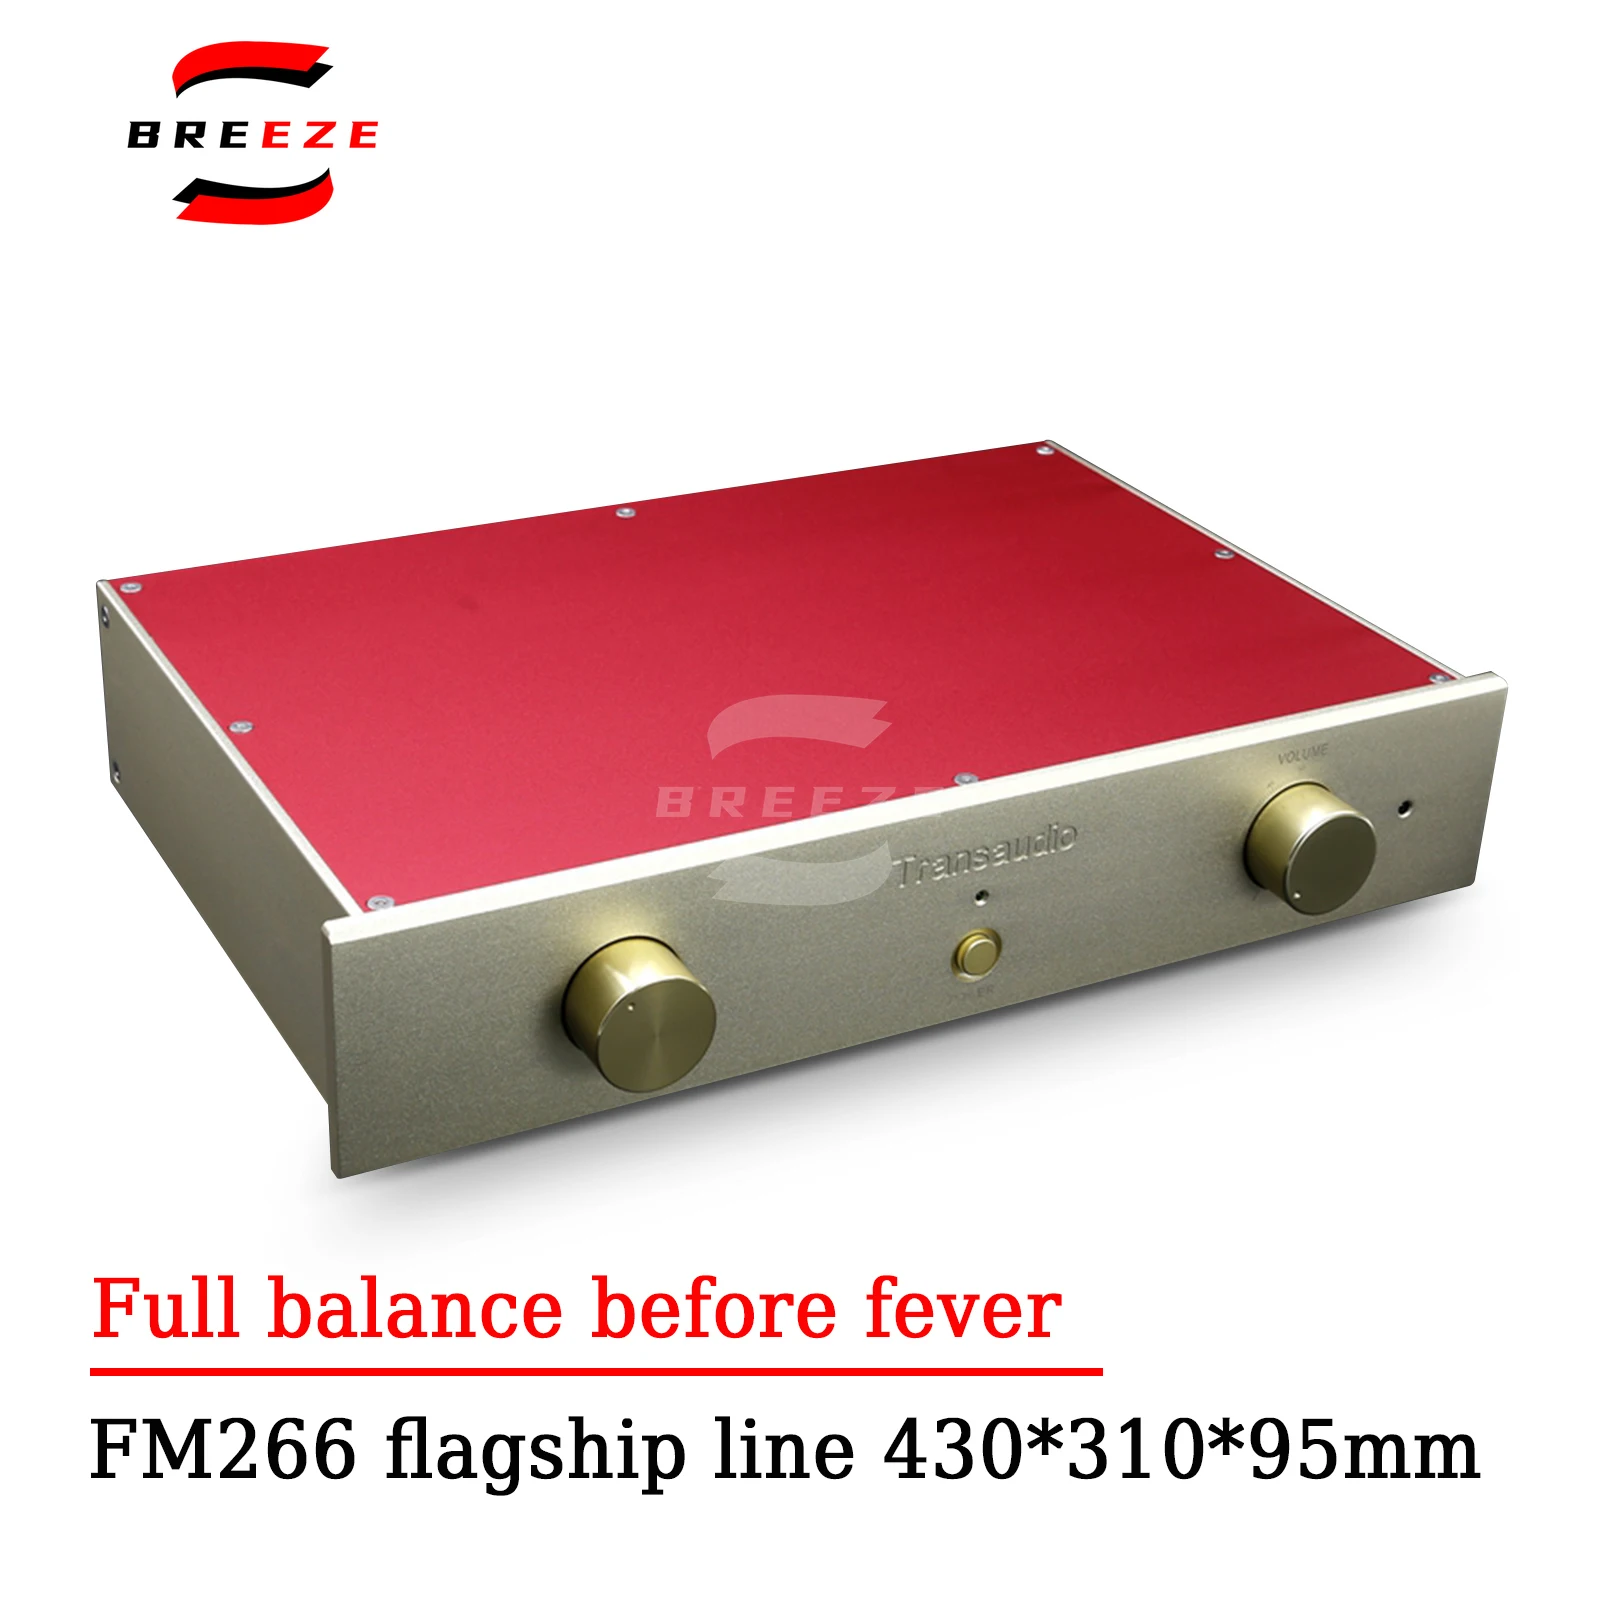 

BREEZE HIFI FM255 Flagship Line Fully Balanced Pre-fever Amplifier Home Theater Factory Direct Sales